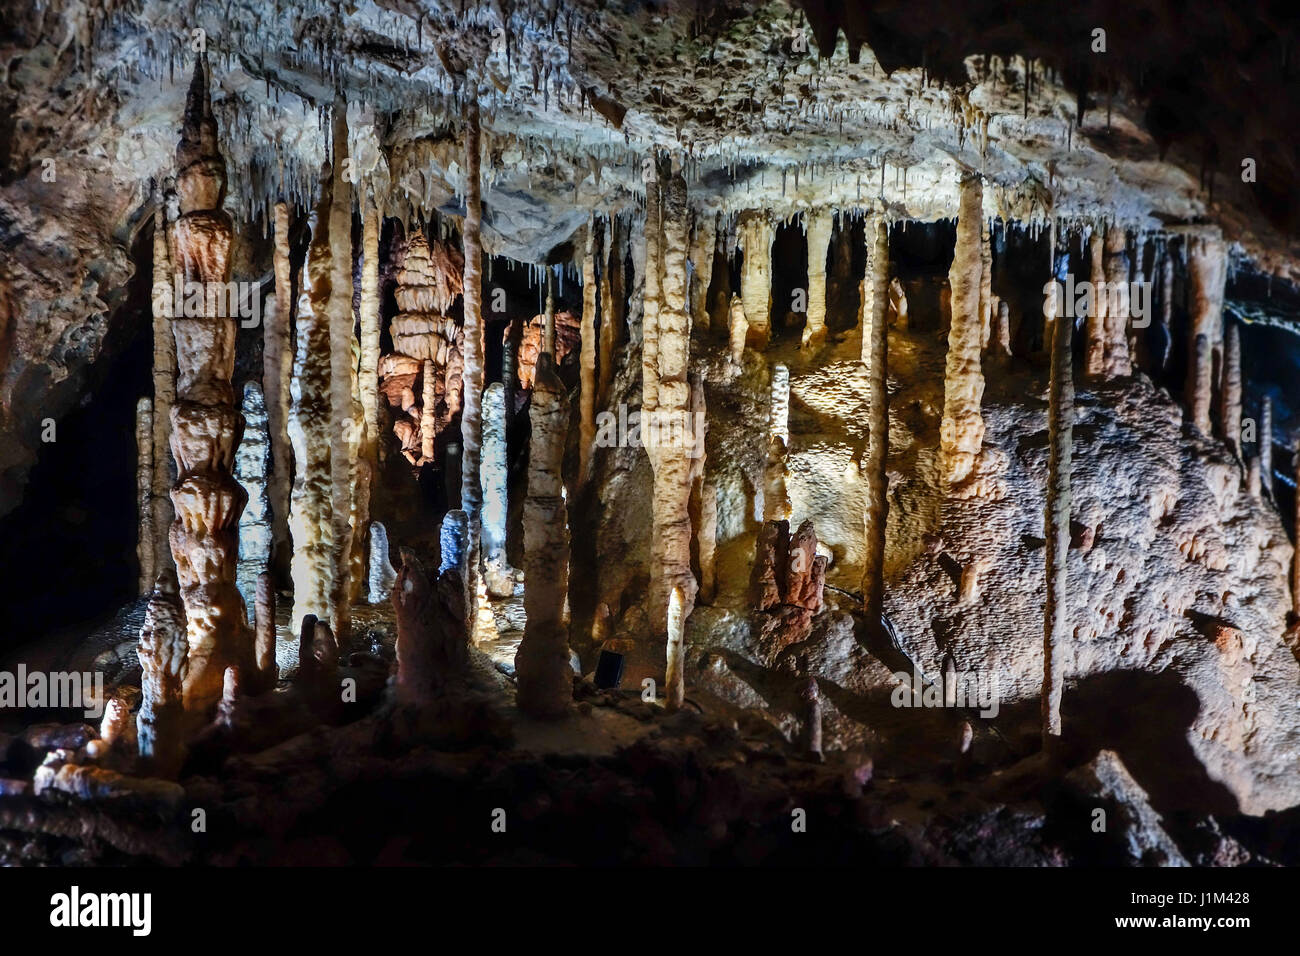 Straw stalactites, stalagmites and columns in limestone cave of the Caves of Han-sur-Lesse / Grottes de Han, Belgian Ardennes, Belgium Stock Photo